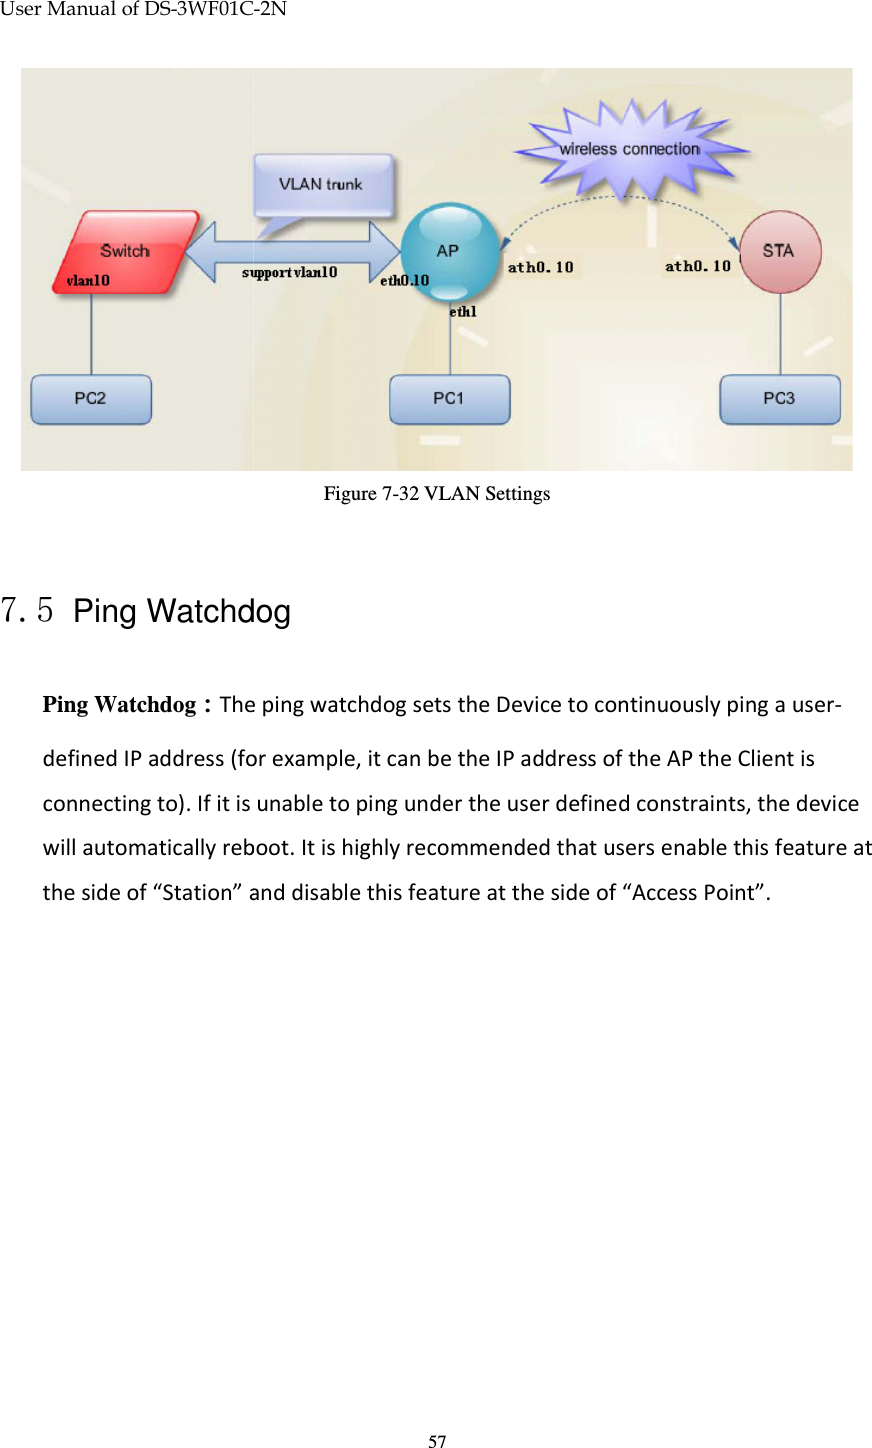 User Manual of DS-3WF01C   7.5 Ping WatchdogPing Watchdog：The ping watchdog sets the Device to continuously ping a userdefined IP address (for example, it can be the IP addresconnecting to). If it is unable to ping under the user defined constraints, the device will automatically reboot. It is highly recommended that users enable this feature at the side of “Station” and disable this feature at the sid3WF01C-2N 57Figure 7-32 VLAN Settings Ping Watchdog The ping watchdog sets the Device to continuously ping a userdefined IP address (for example, it can be the IP address of the AP the Client is connecting to). If it is unable to ping under the user defined constraints, the device will automatically reboot. It is highly recommended that users enable this feature at the side of “Station” and disable this feature at the side of “Access Point”. The ping watchdog sets the Device to continuously ping a user-s of the AP the Client is connecting to). If it is unable to ping under the user defined constraints, the device will automatically reboot. It is highly recommended that users enable this feature at e of “Access Point”. 